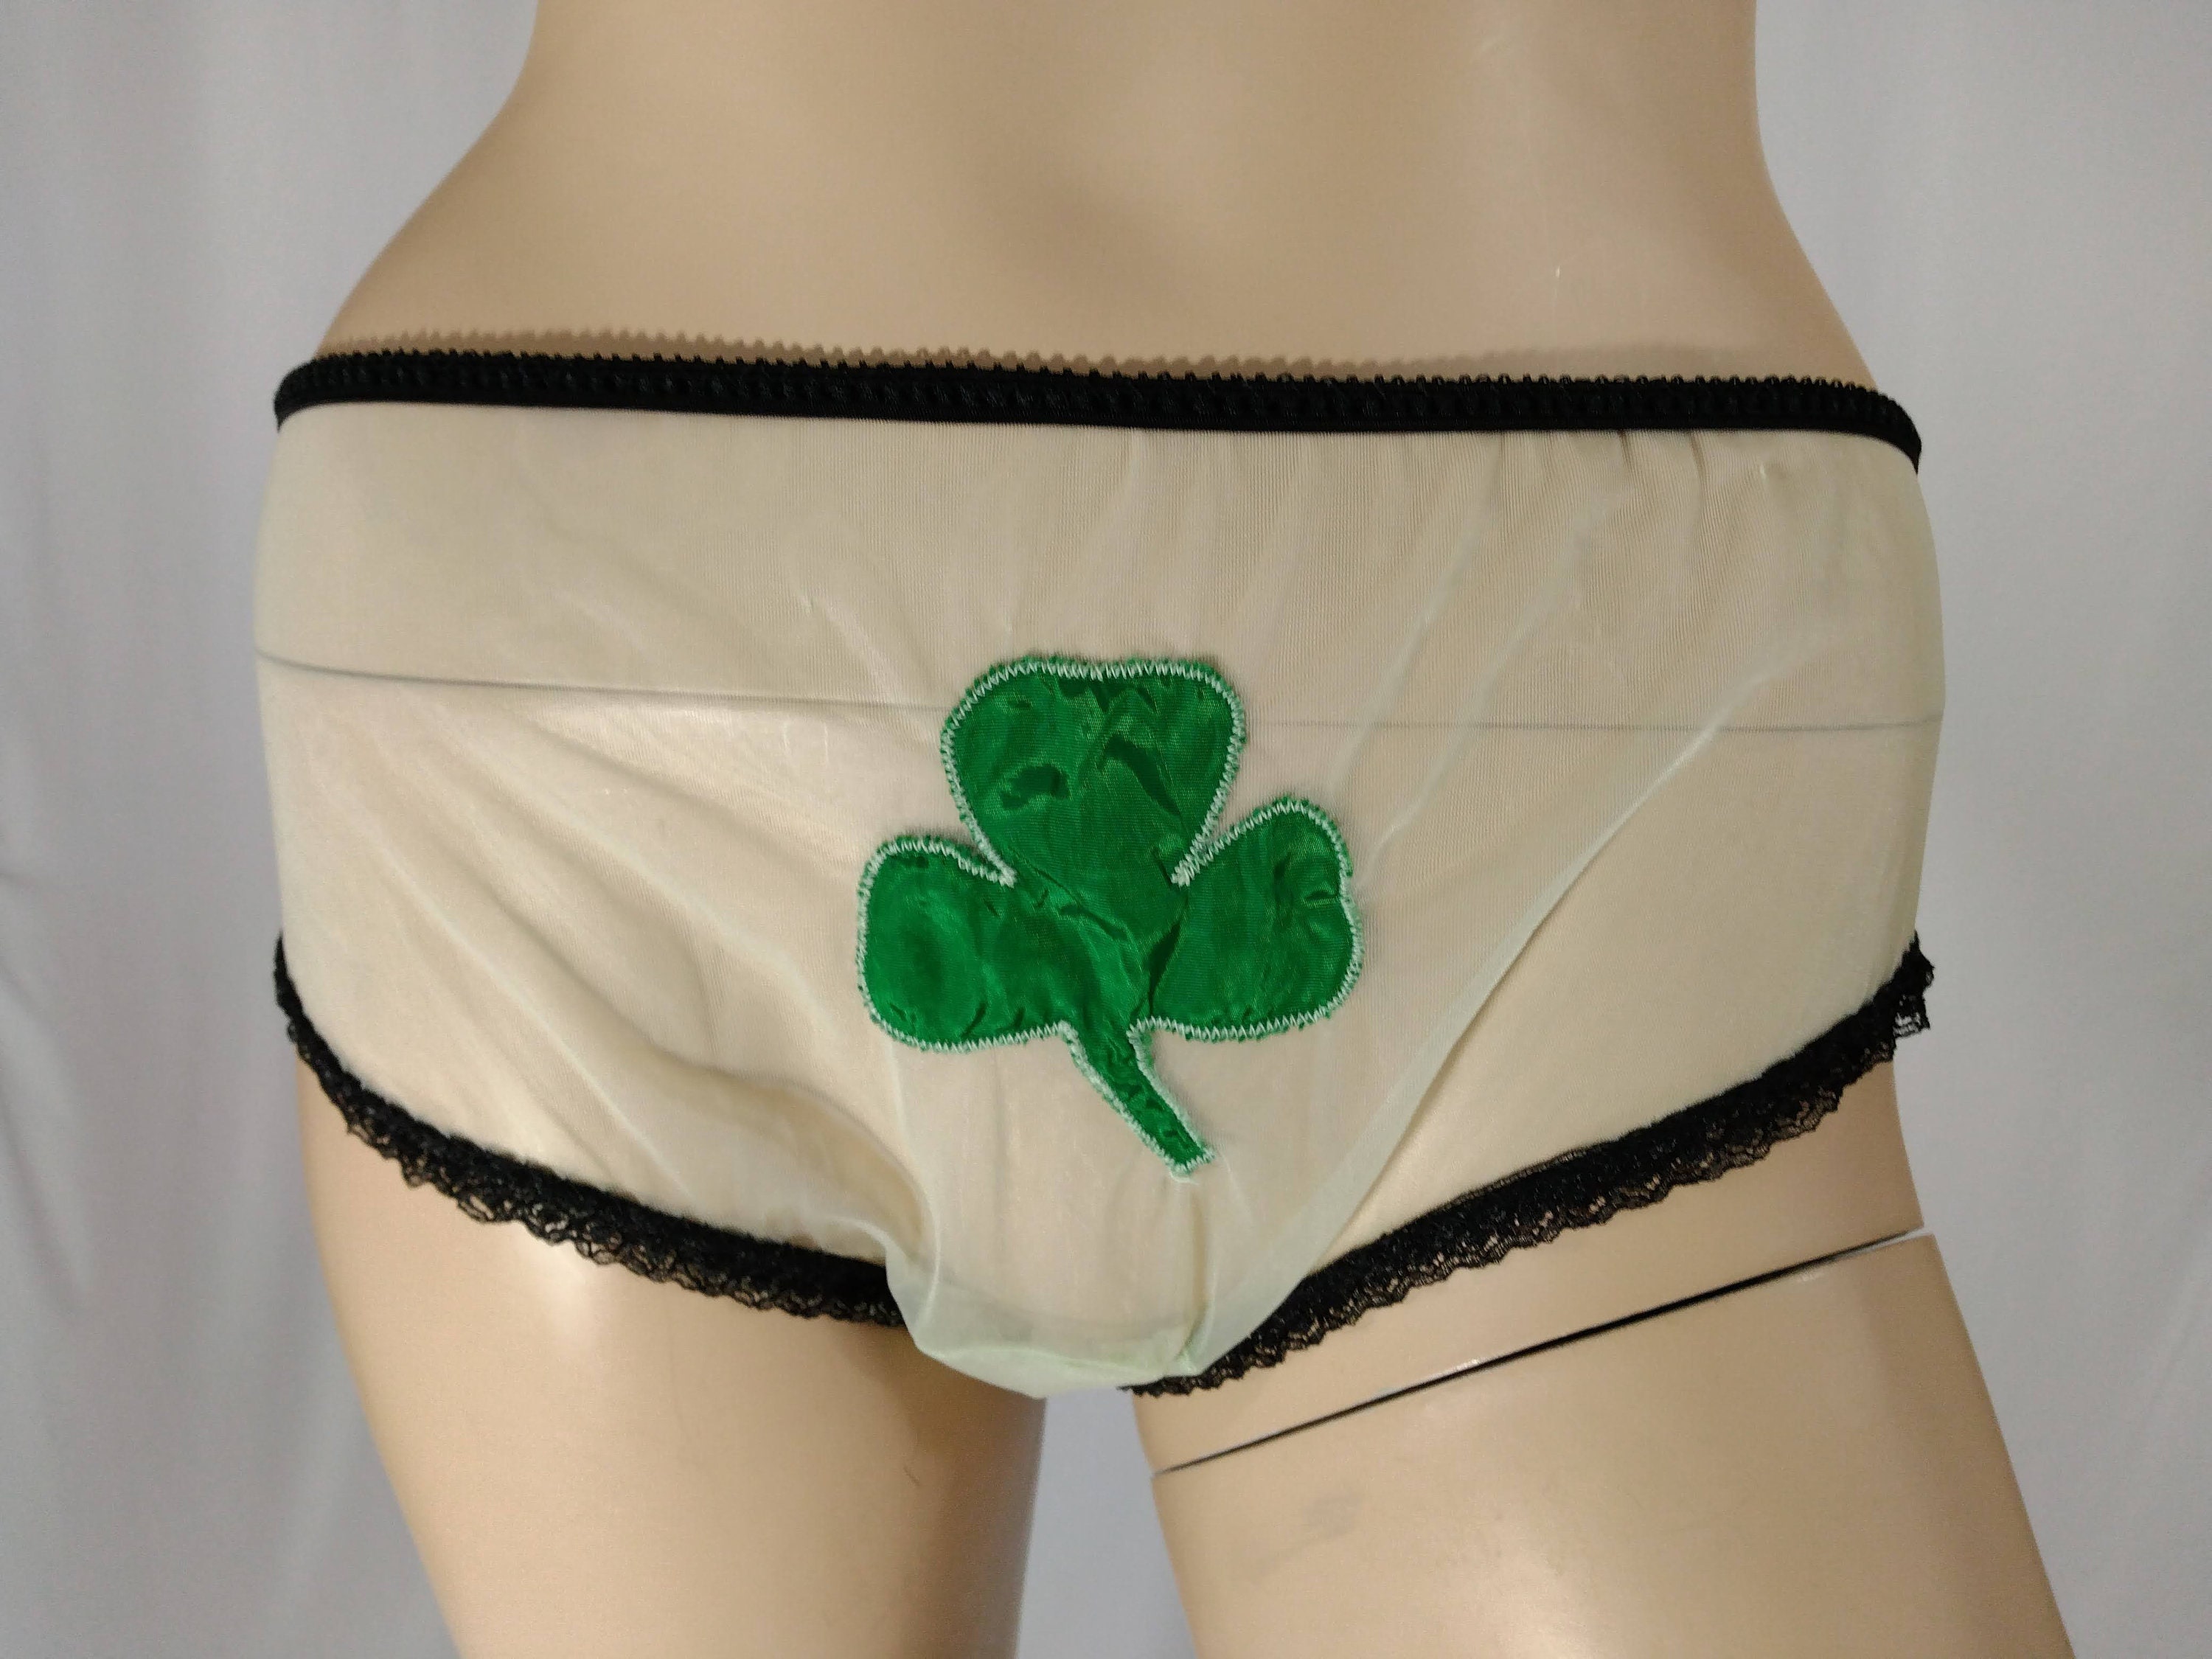 60's Lingerie Panties Women's Novelty St. Patrick's Day 3 Leaf Clover Pale  Green Sheer Green Satin Clover Panties by TREASURE ISLAND Size S -   Canada